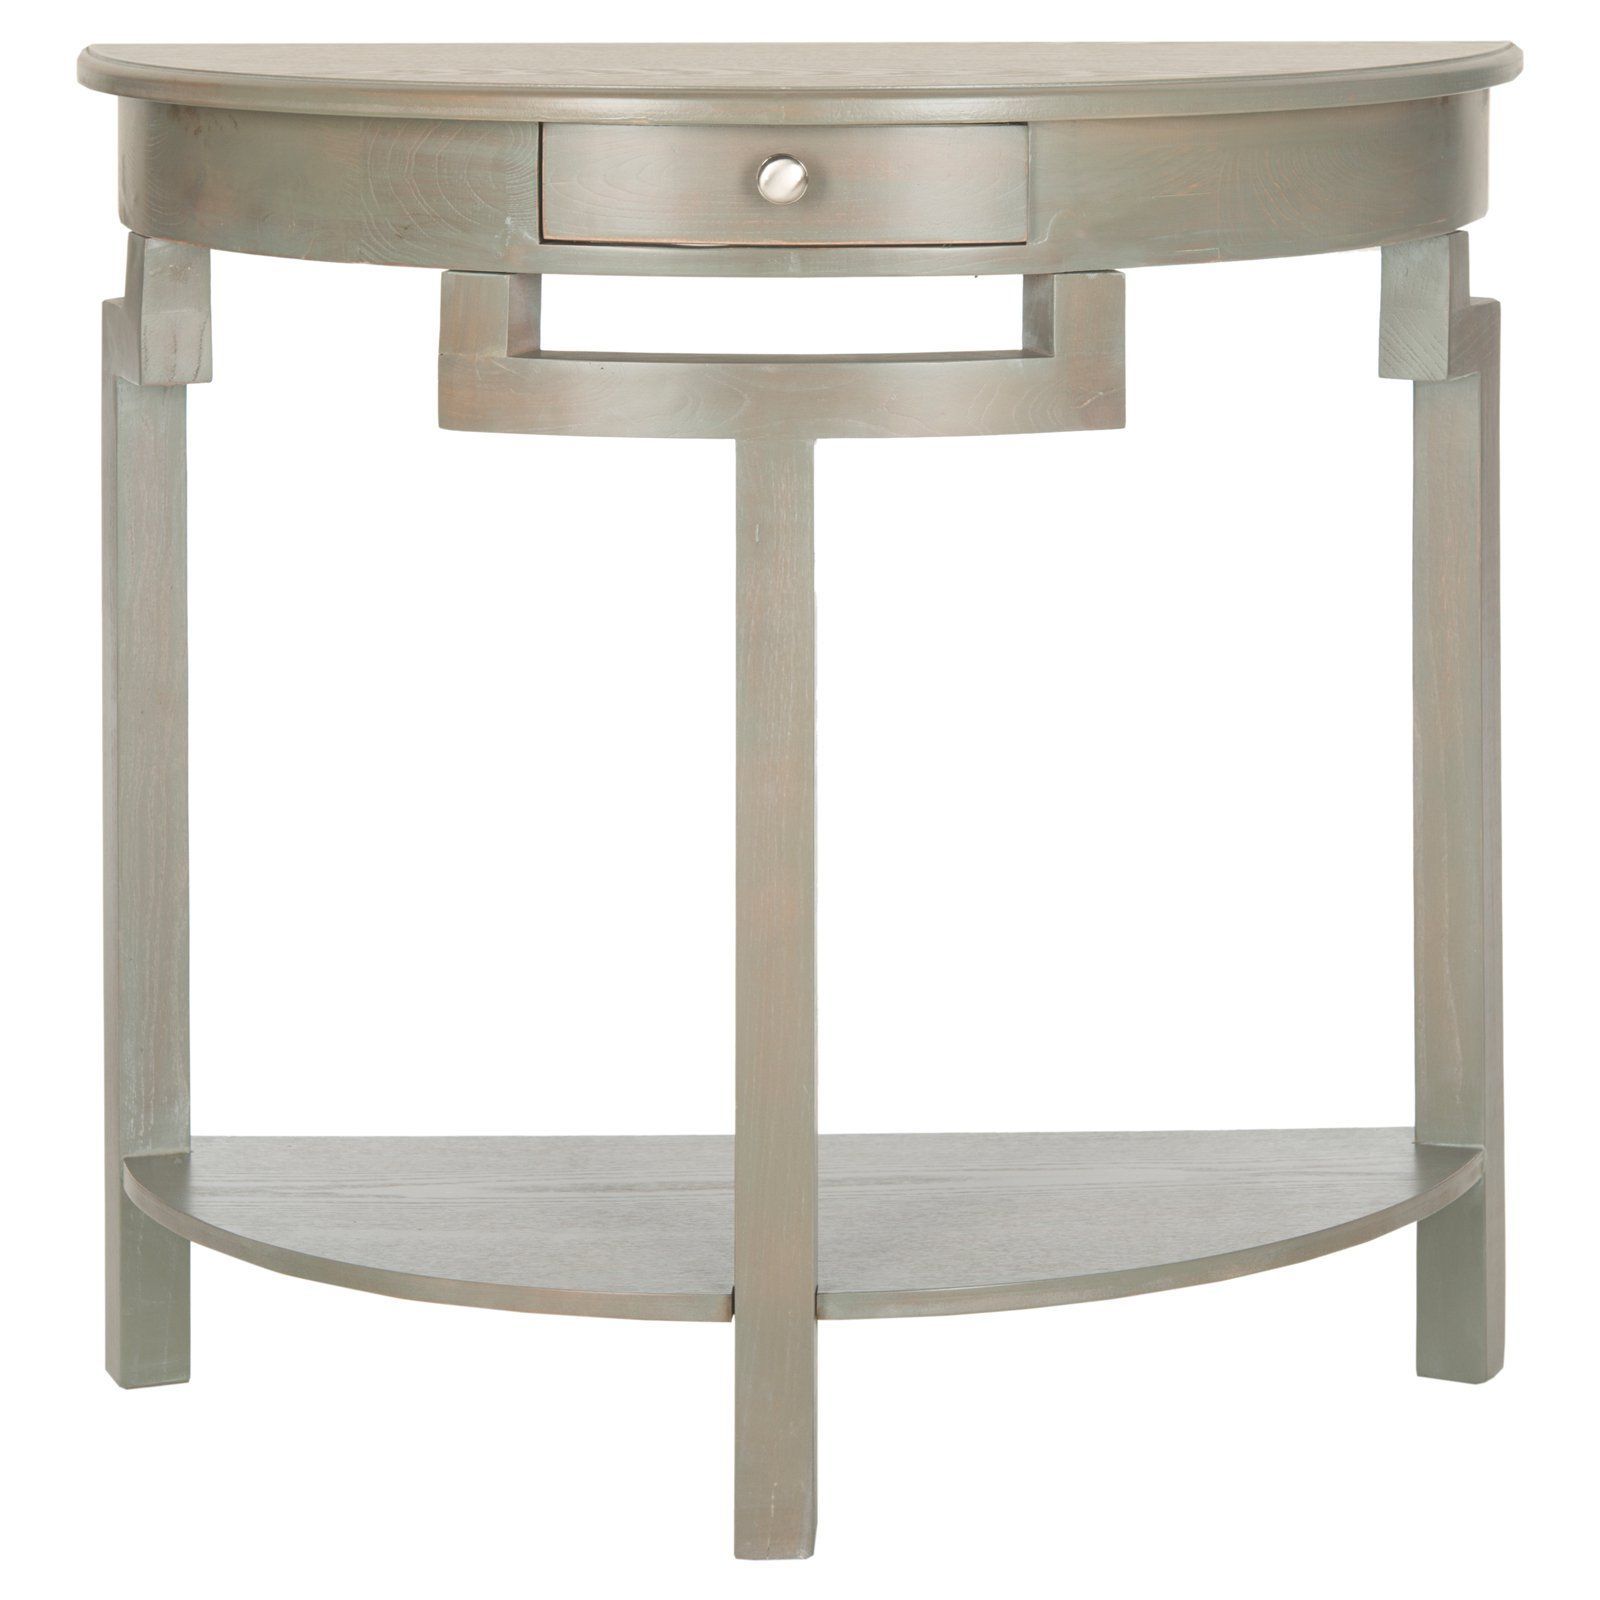 Safavieh Liana Console Table | Console Table, Modern With Regard To Wood Veneer Console Tables (View 13 of 20)